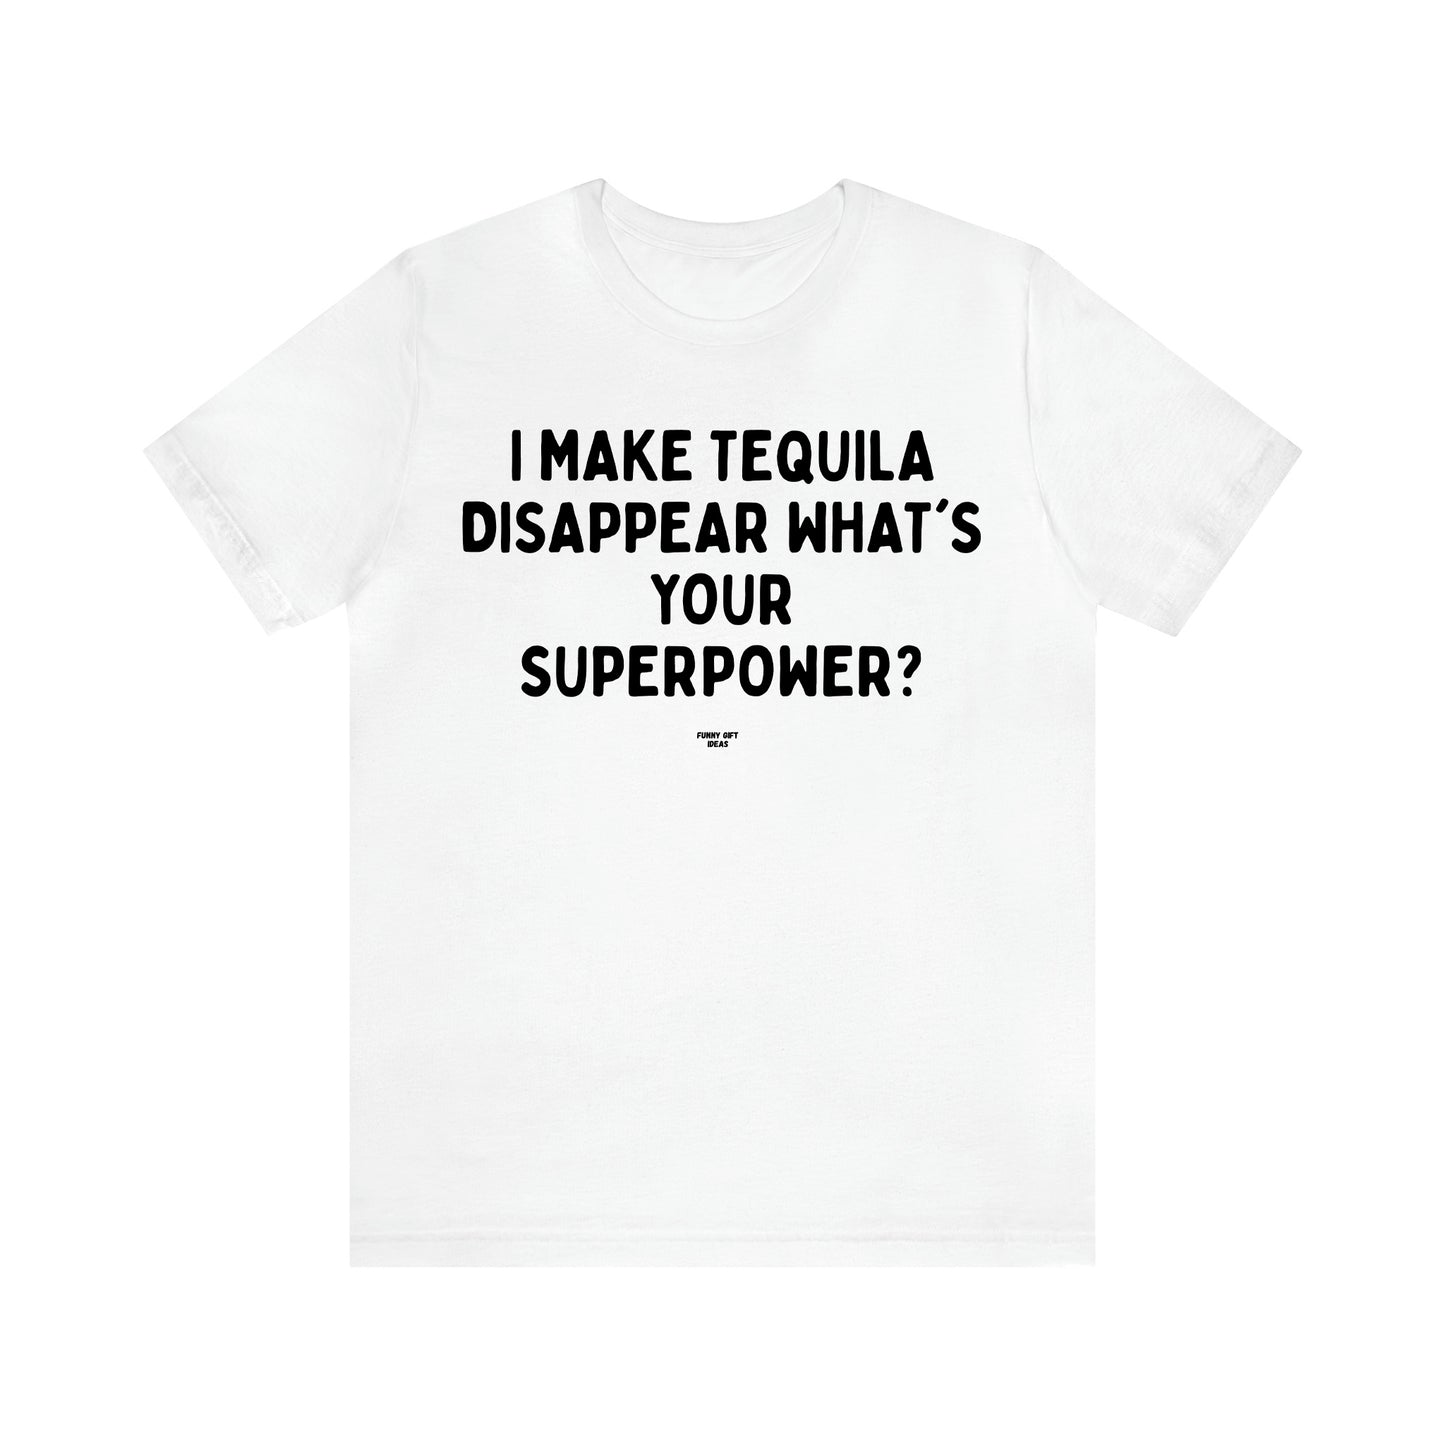 Men's T Shirts I Make Tequila Disappear What's Your Superpower? - Funny Gift Ideas